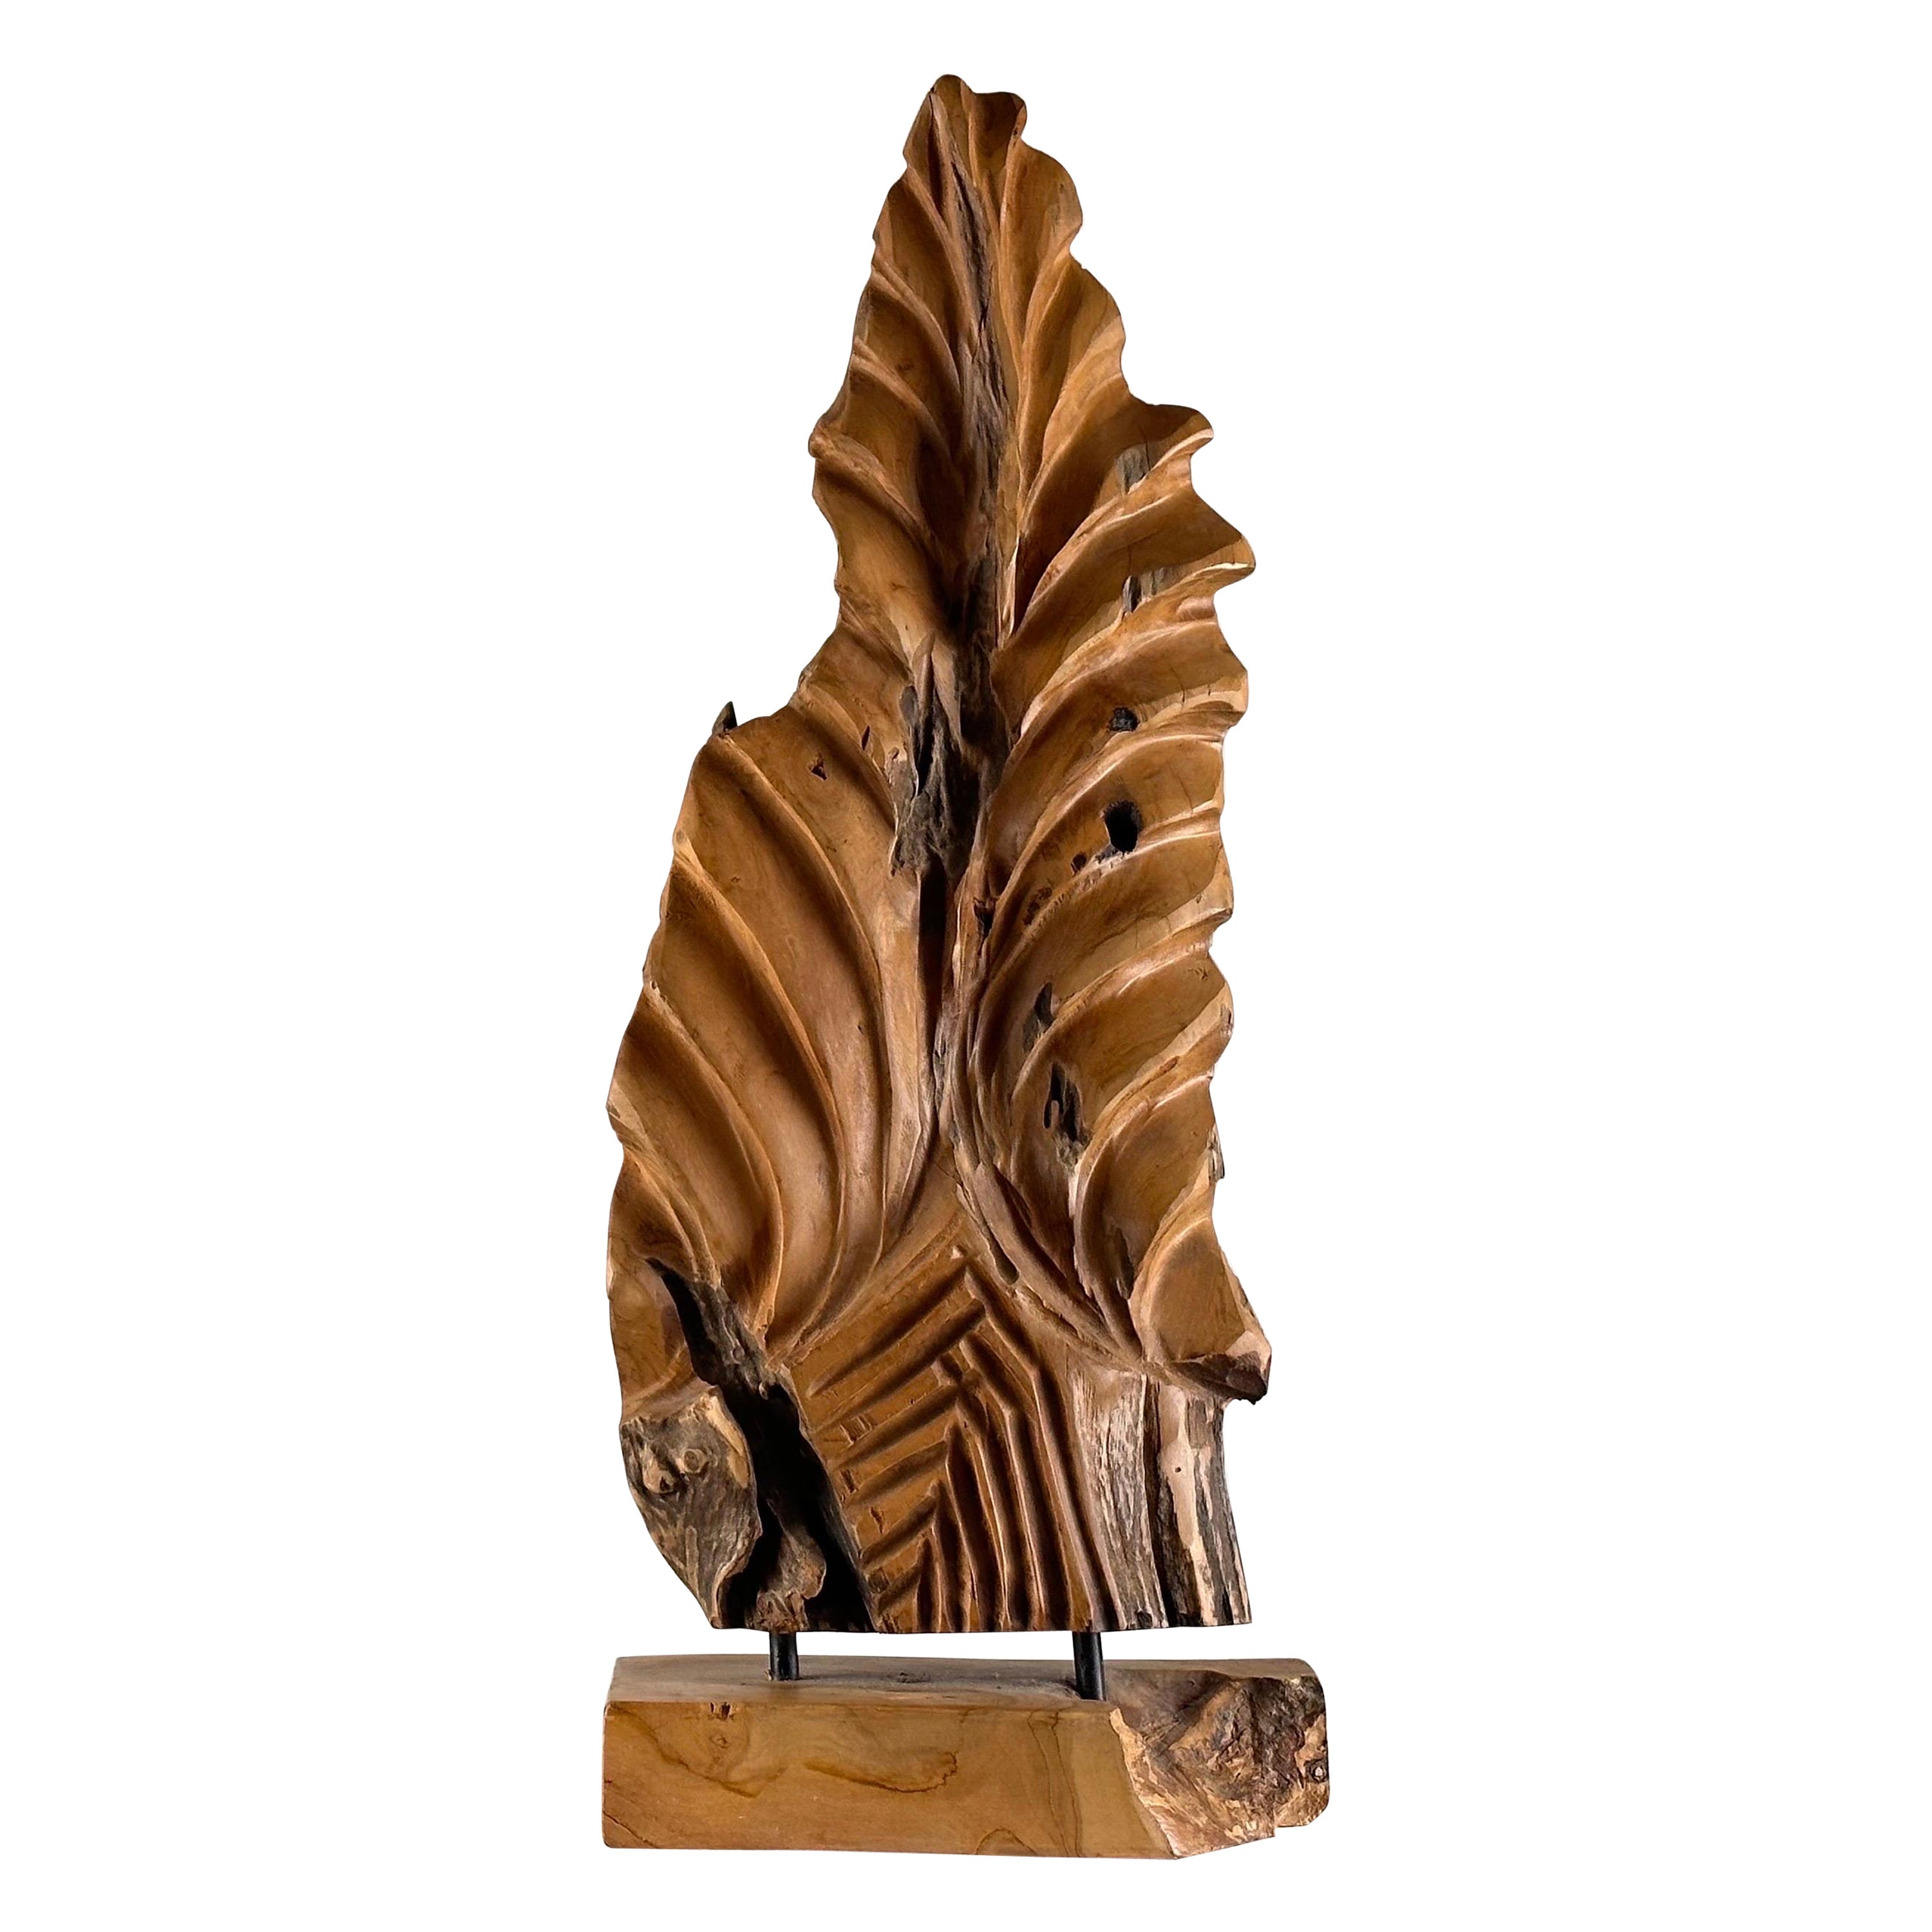 Exquisite Italian Phytomorphic Abstract Sculpture in Natural Ash, 1960s For Sale